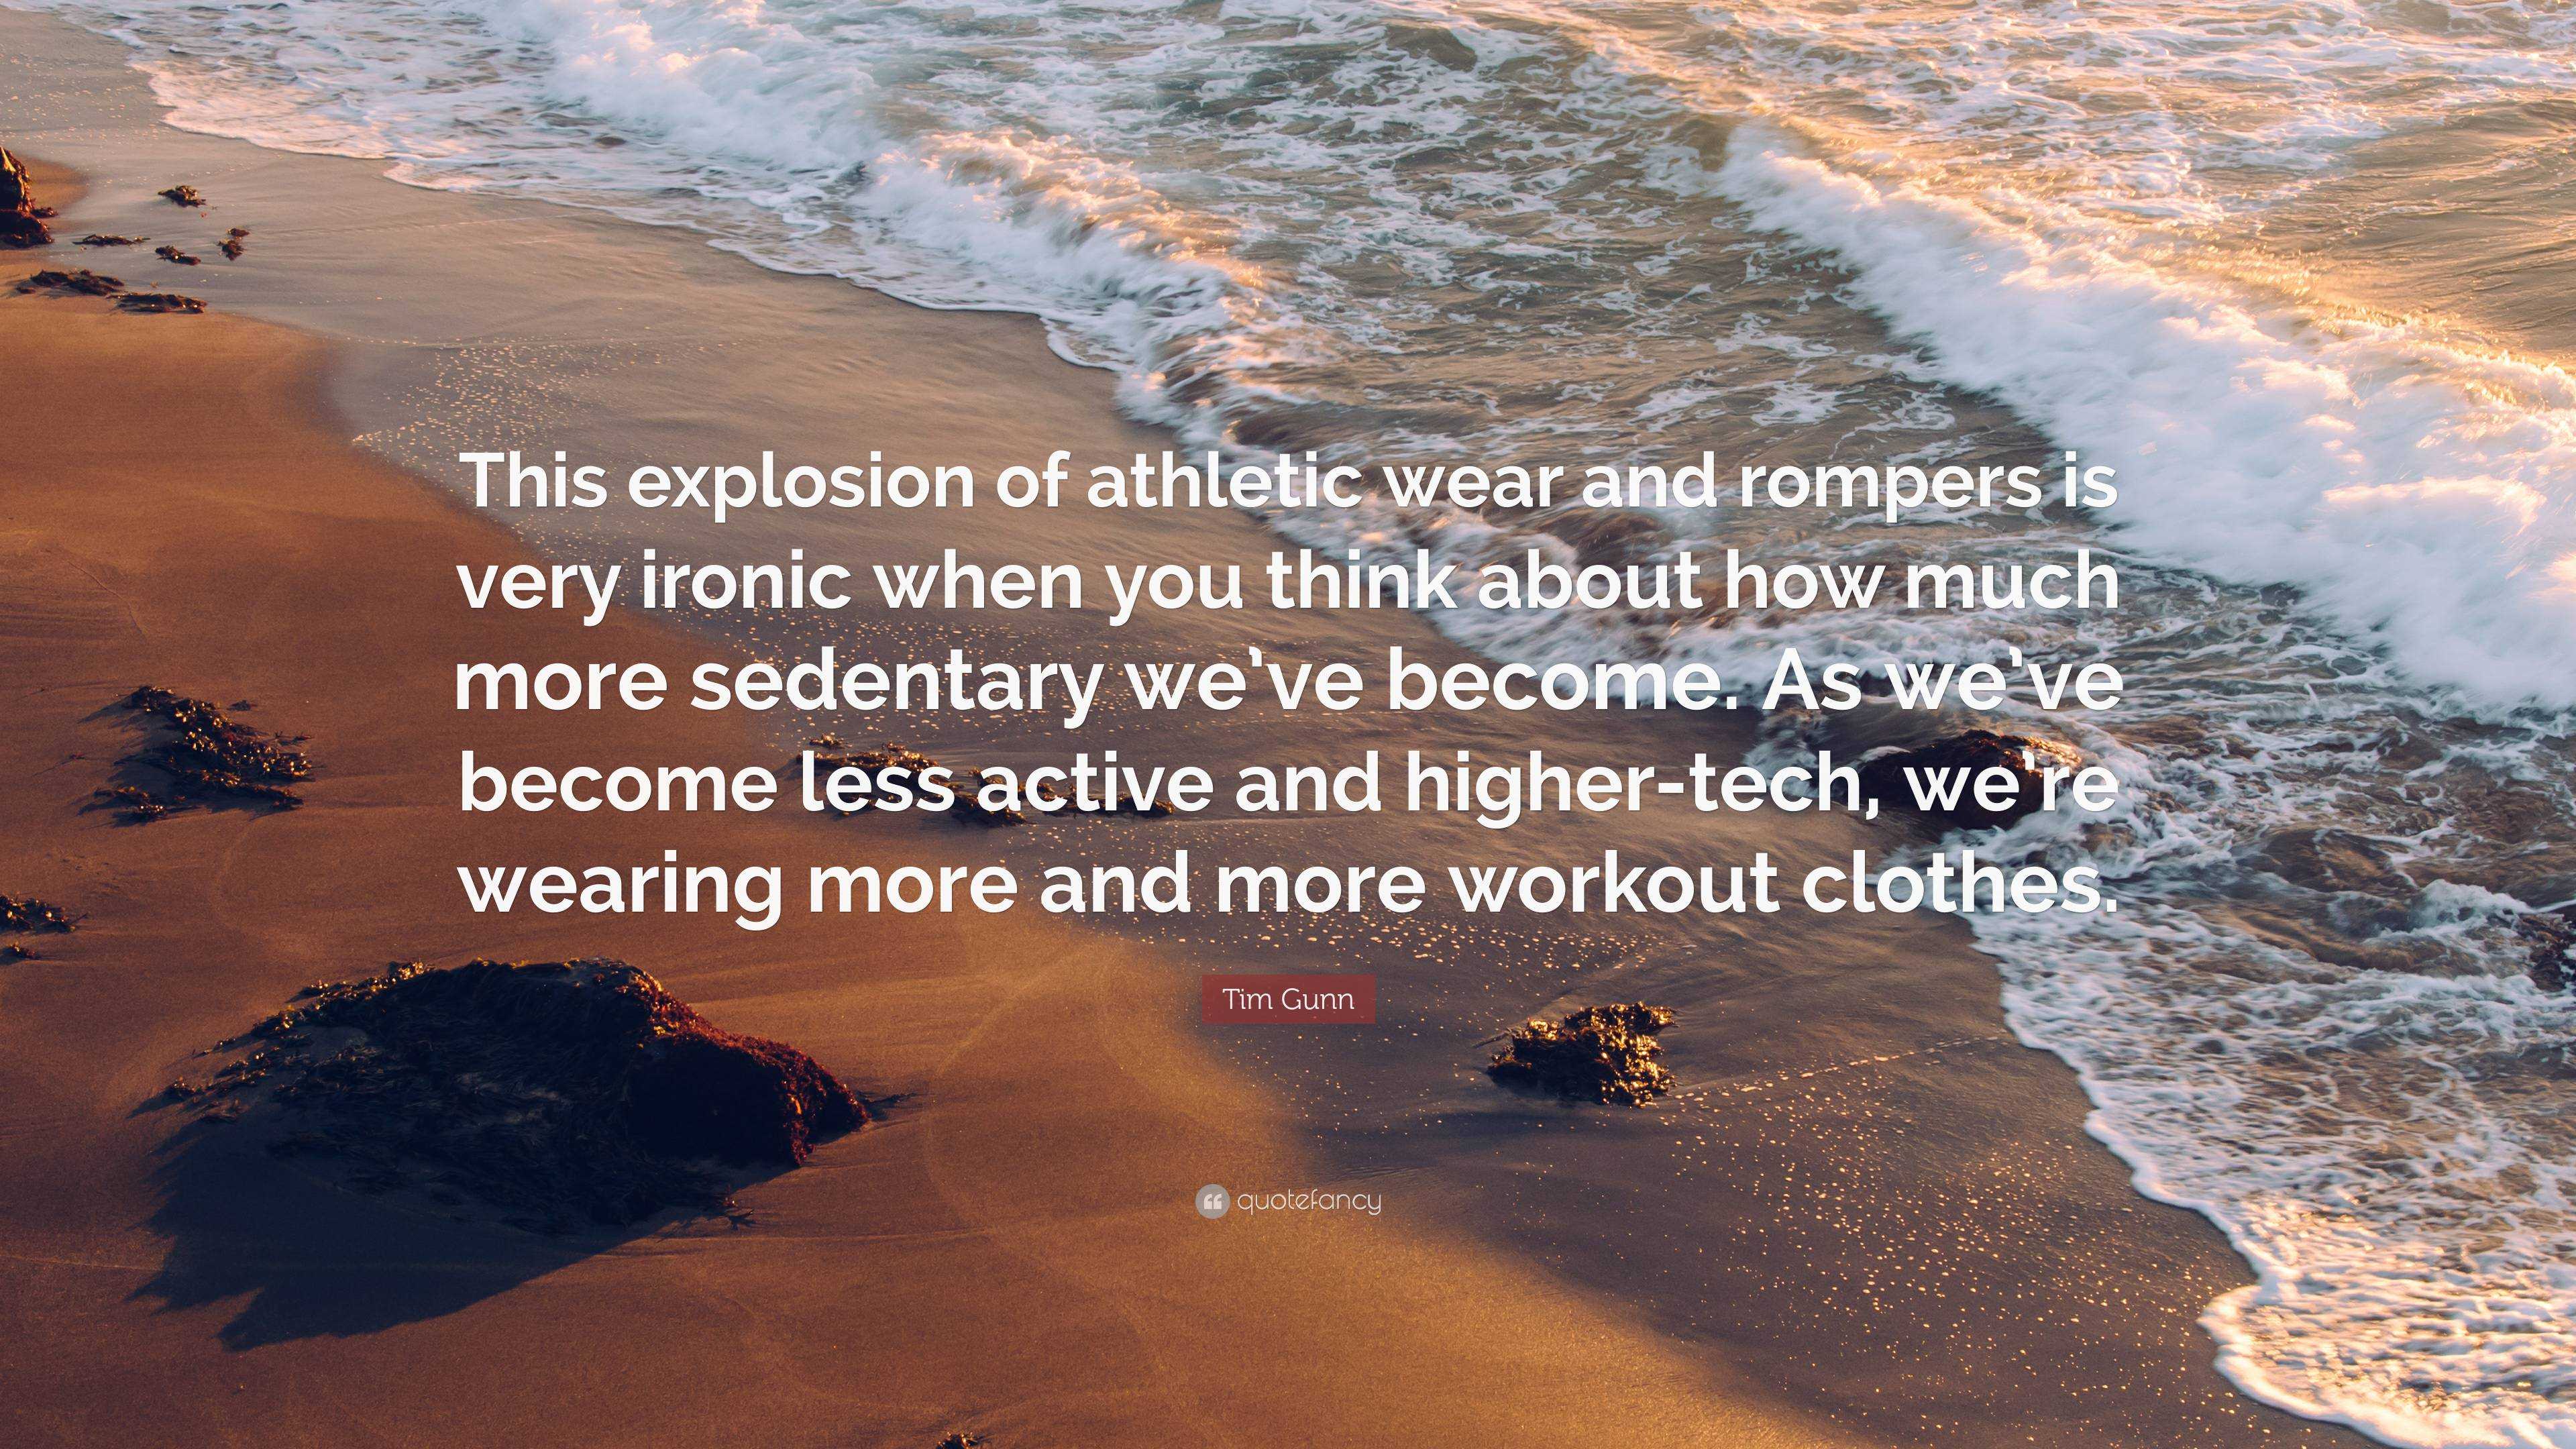 Tim Gunn Quote: “This explosion of athletic wear and rompers is very ironic  when you think about how much more sedentary we've become. As”